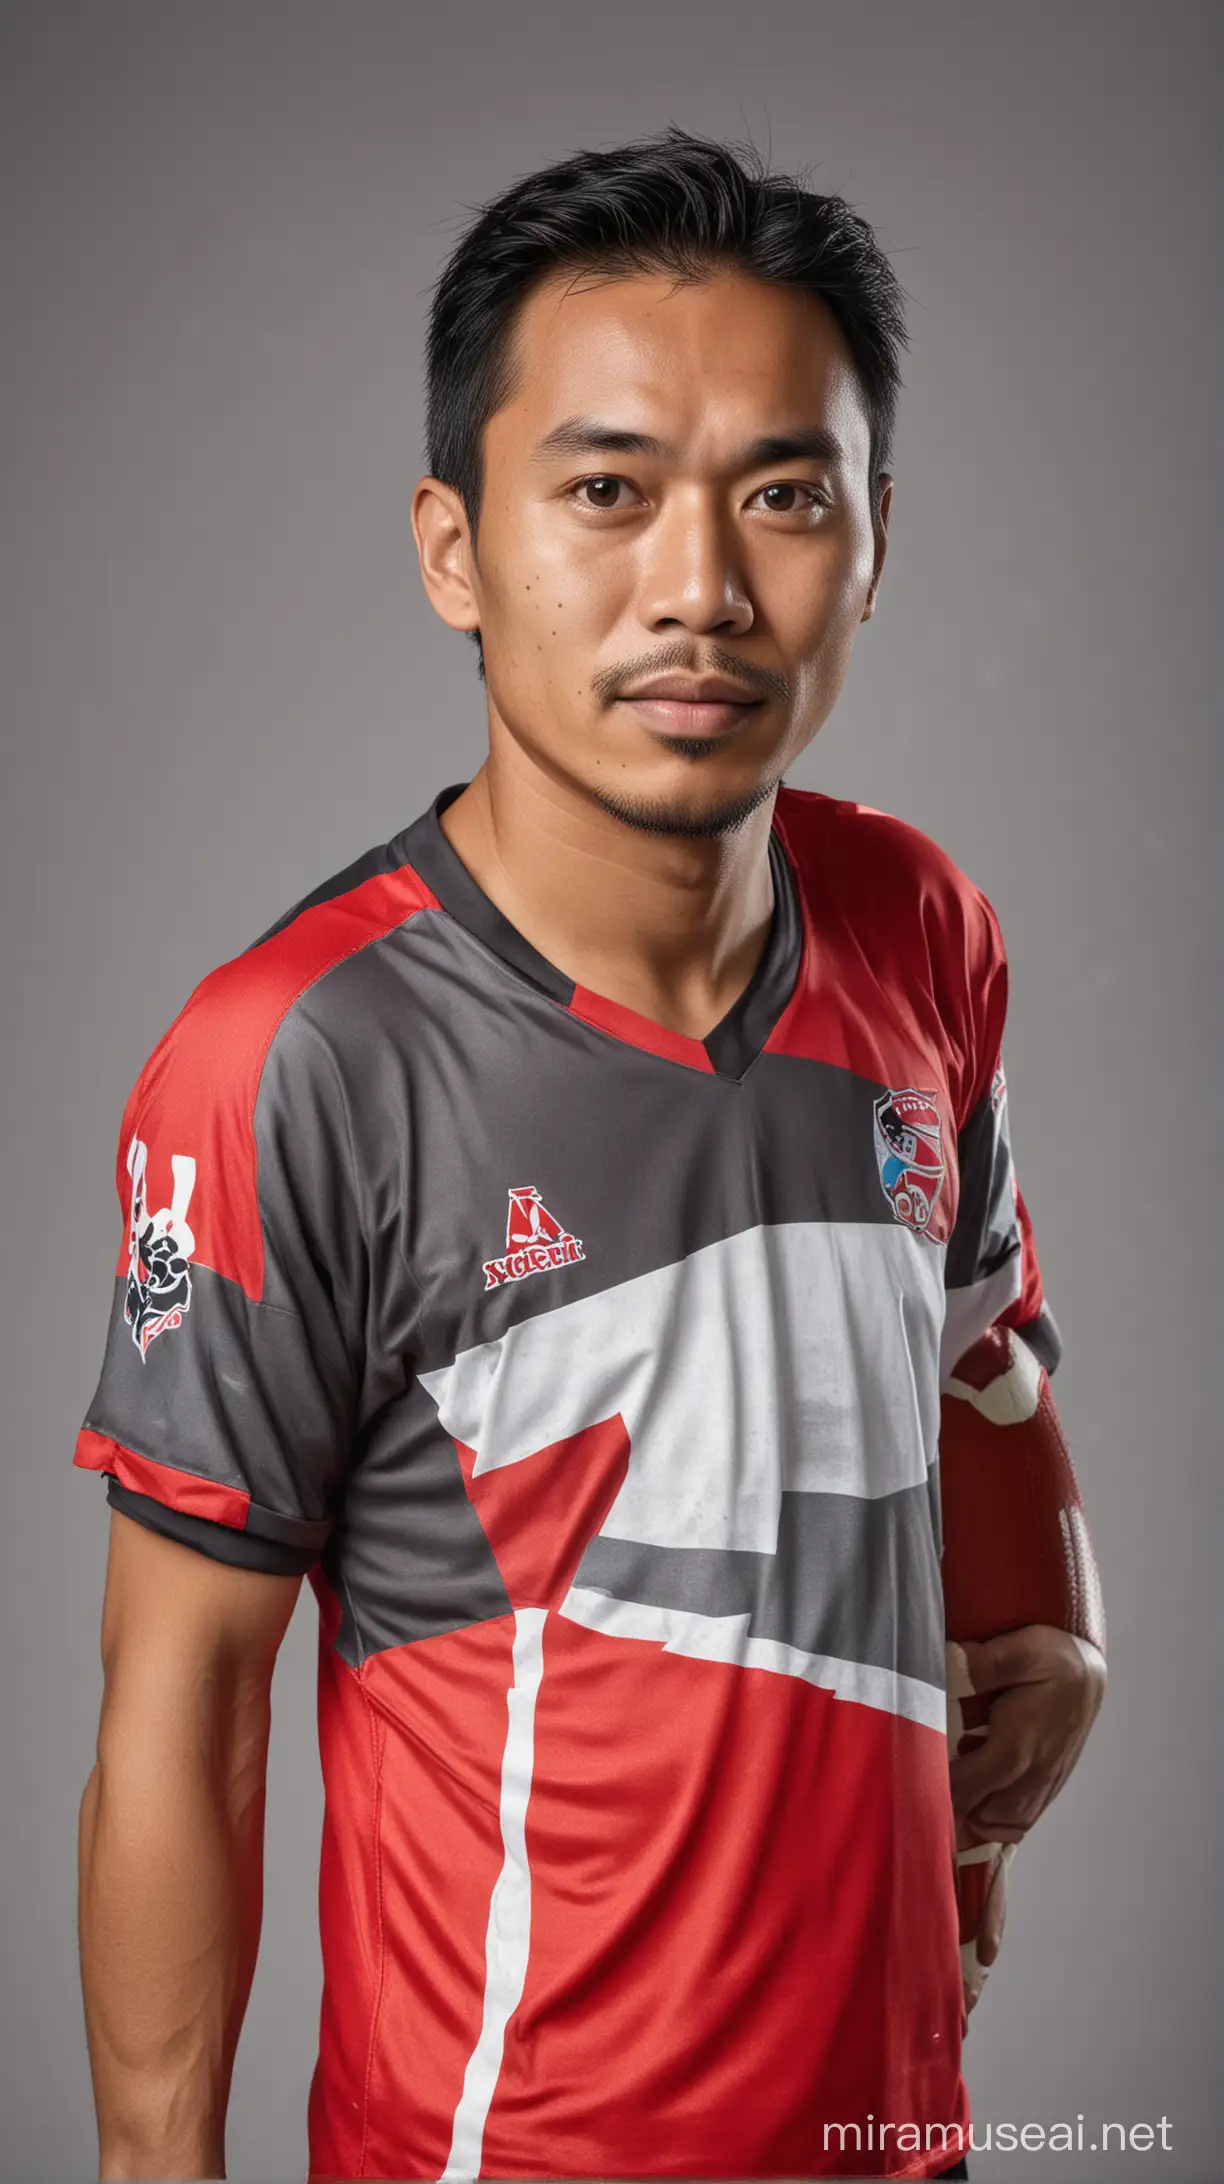 Indonesian Man in Football Jersey Against Grey Background